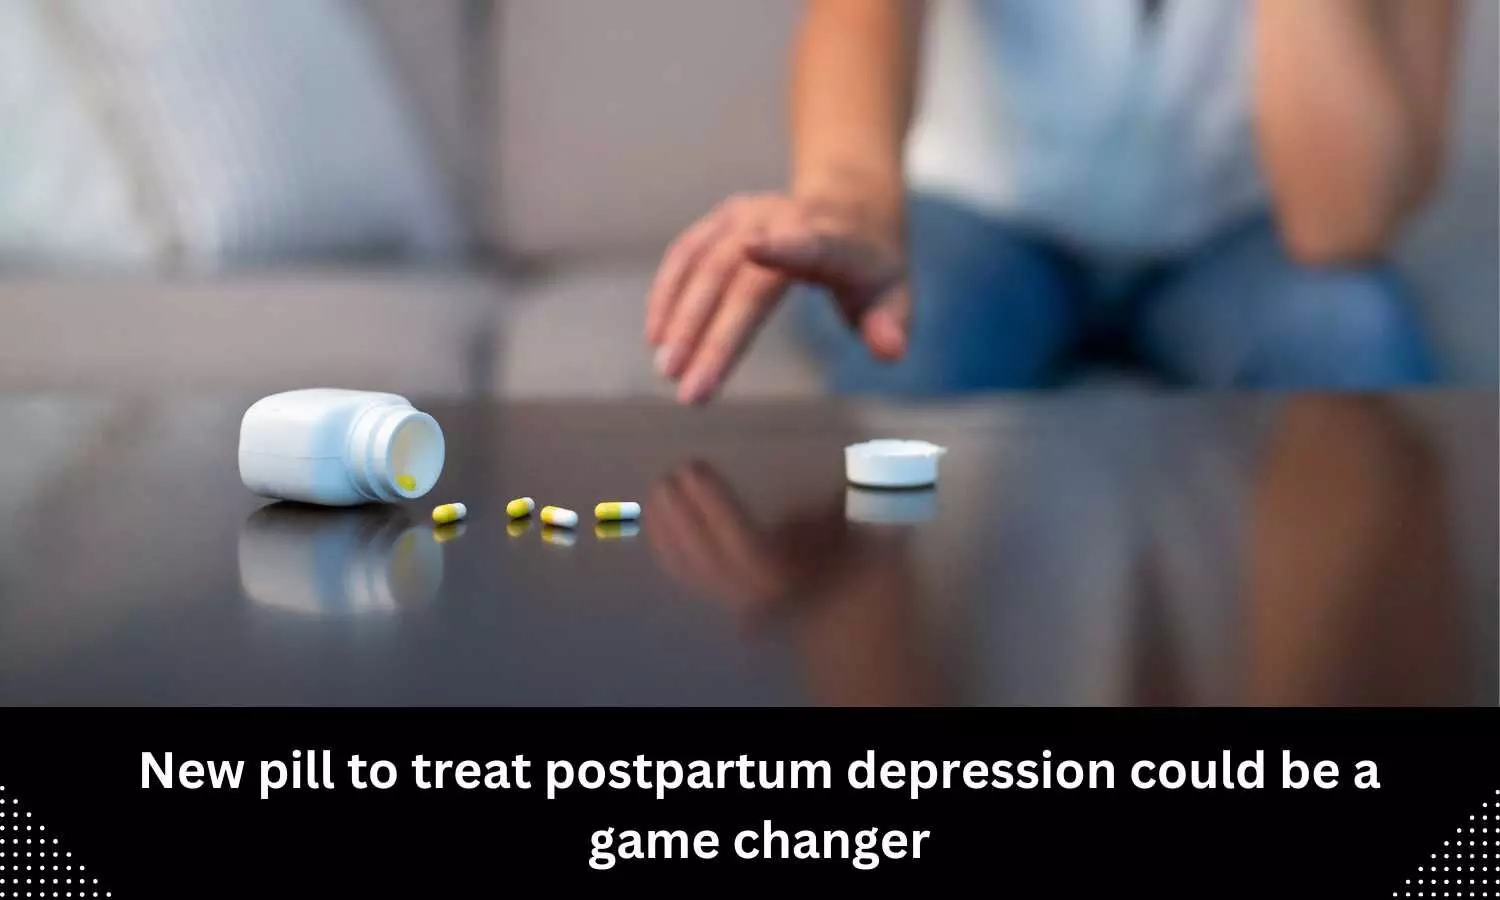 New postpartum depression pill could be game changer